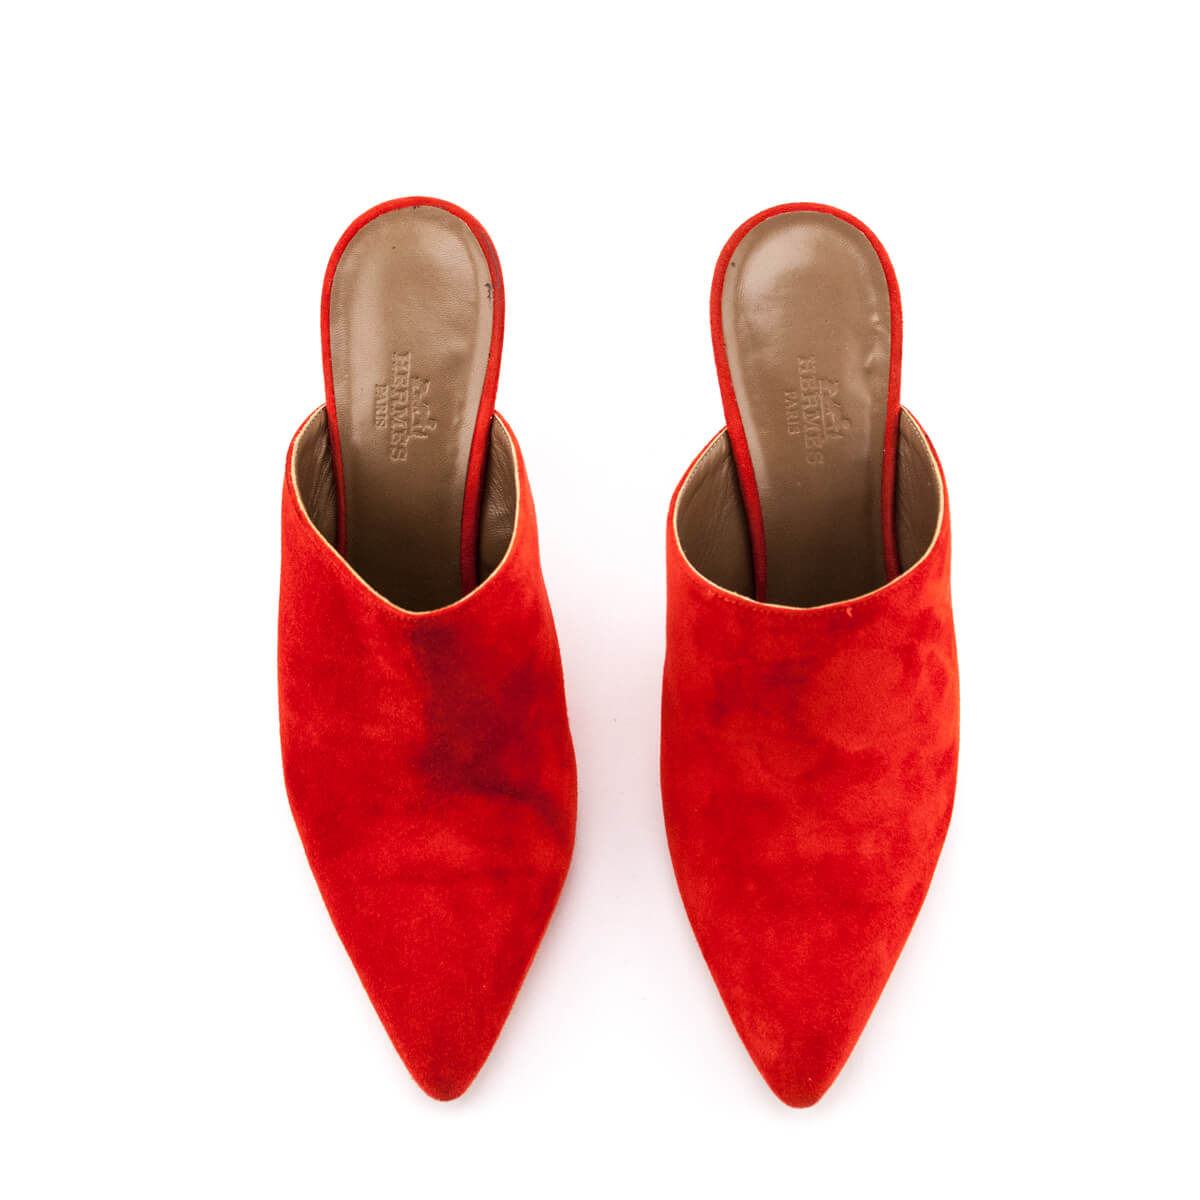 Hermes Red Suede Mules Size US 6 | EU 36 - Love that Bag etc - Preowned Authentic Designer Handbags & Preloved Fashions